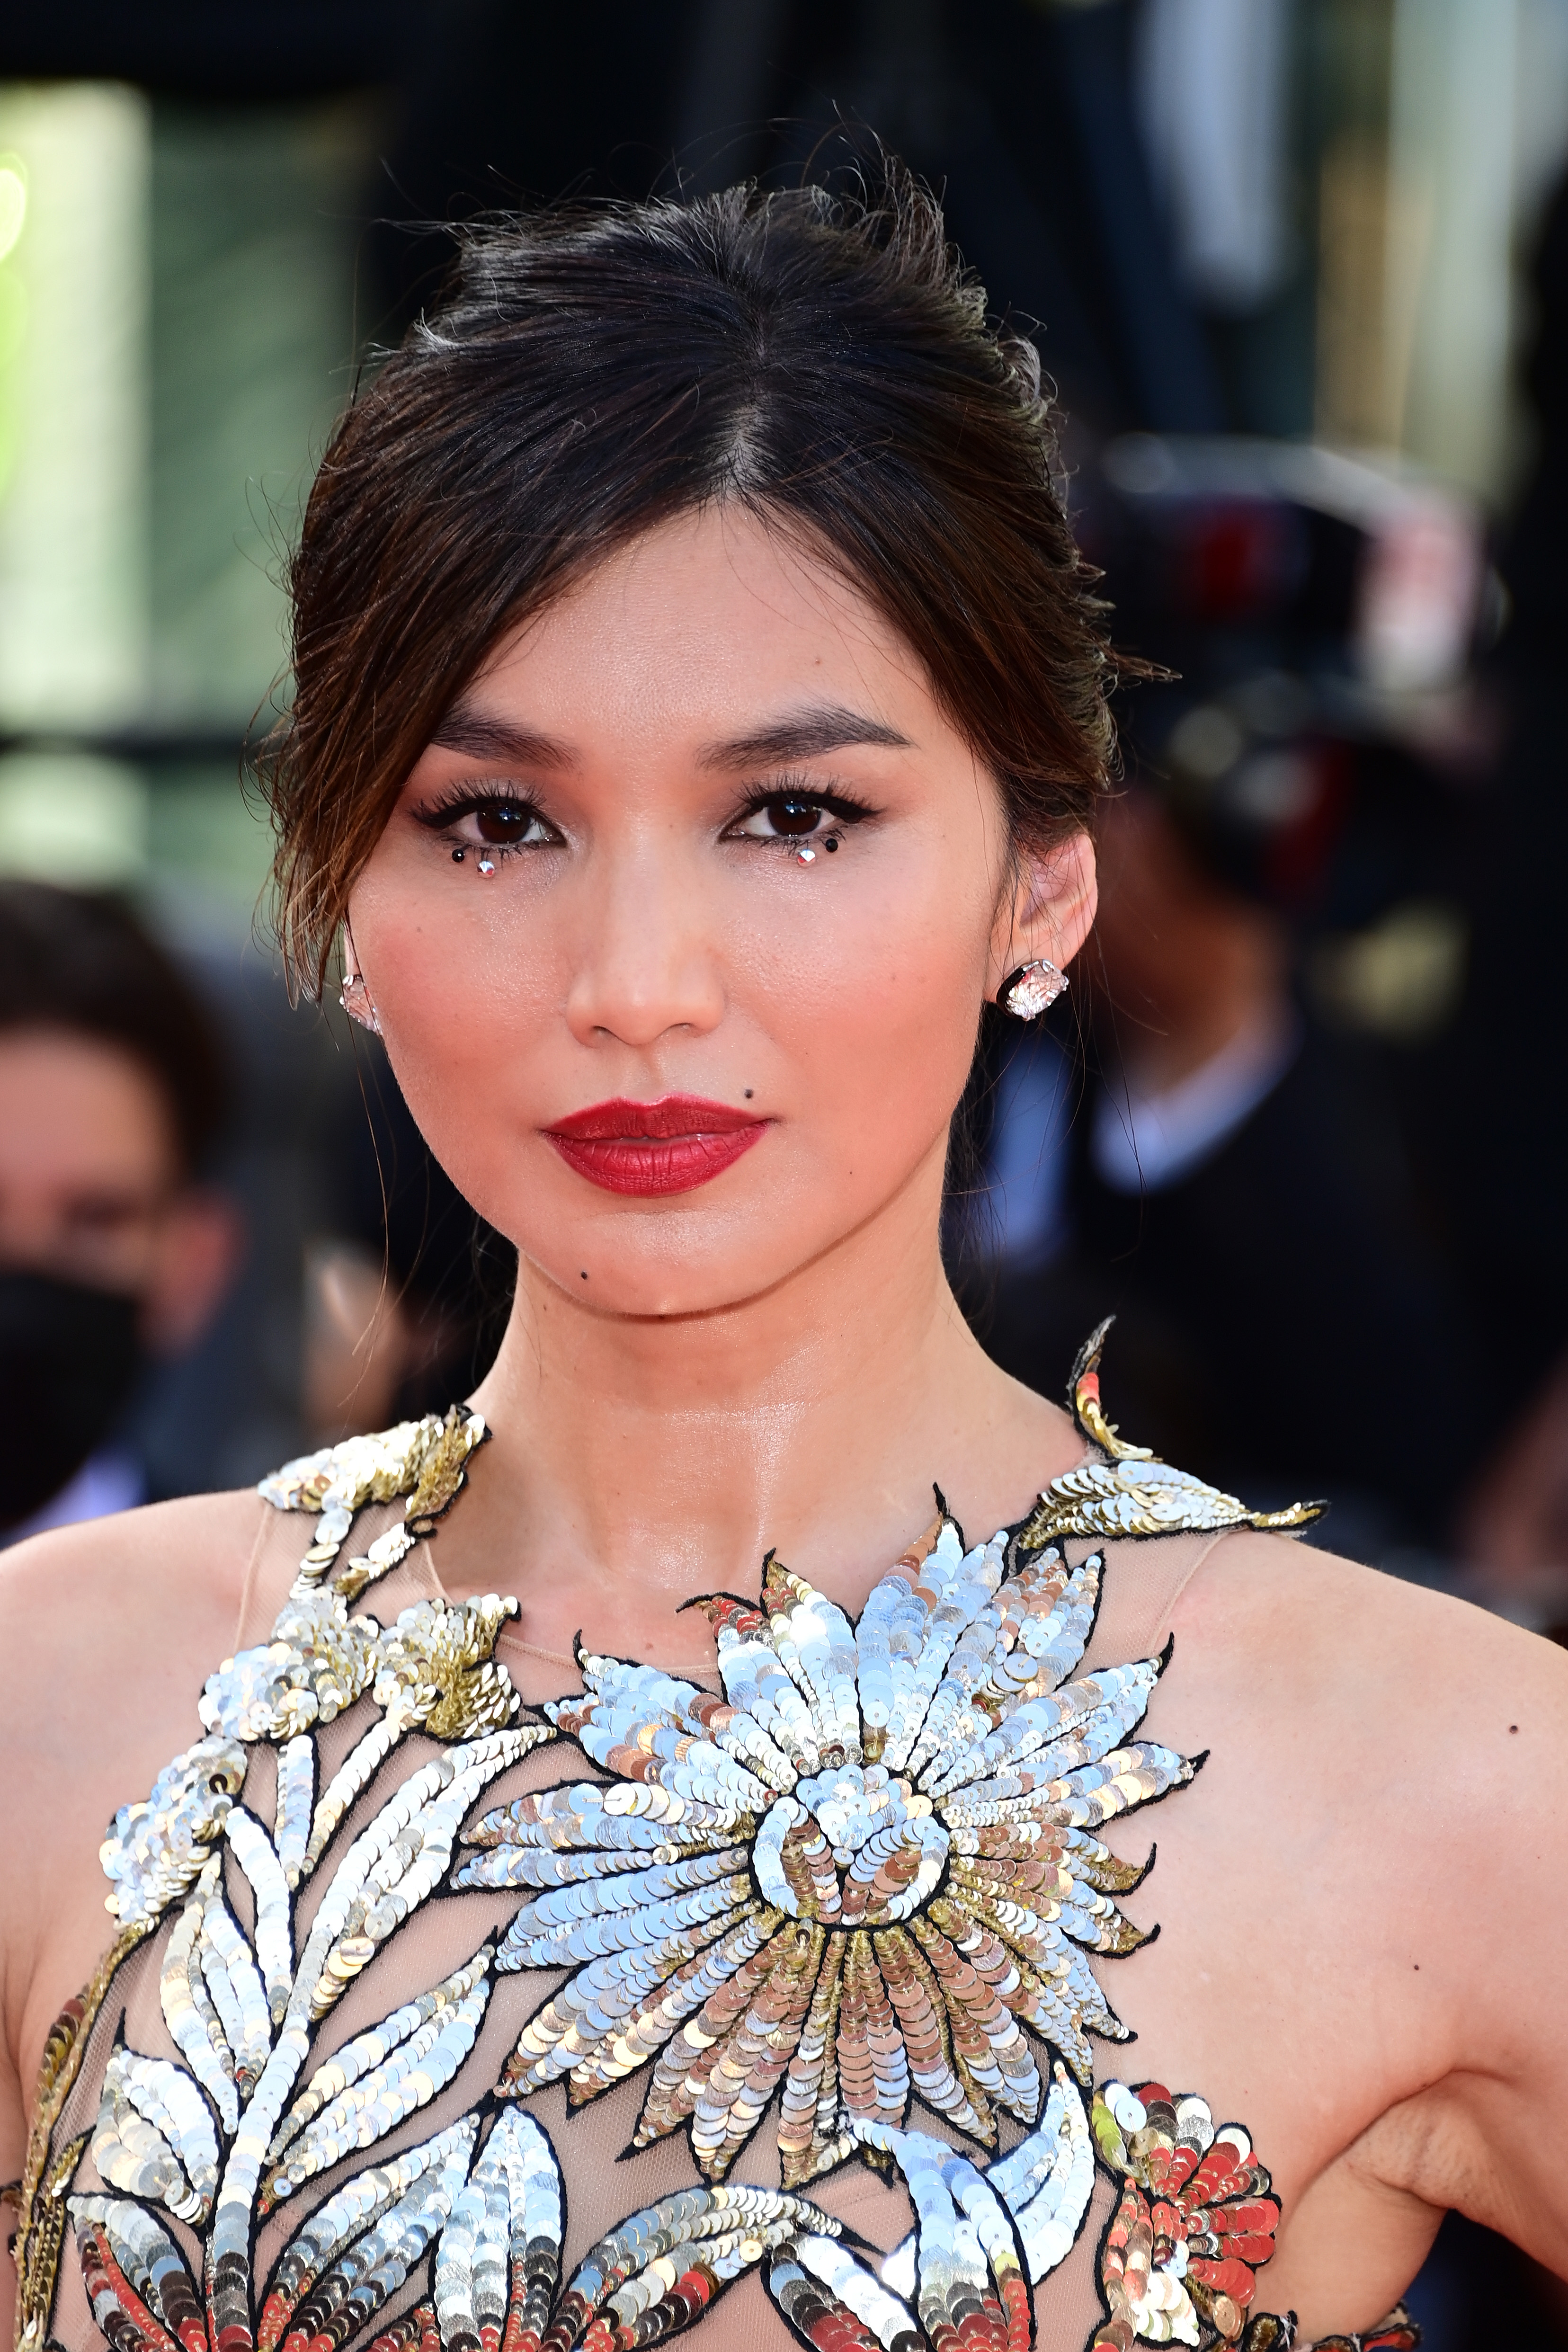 British Asian actress and model Gemma Chan look extremely stunning in her dress designed by a Korean Designer.

